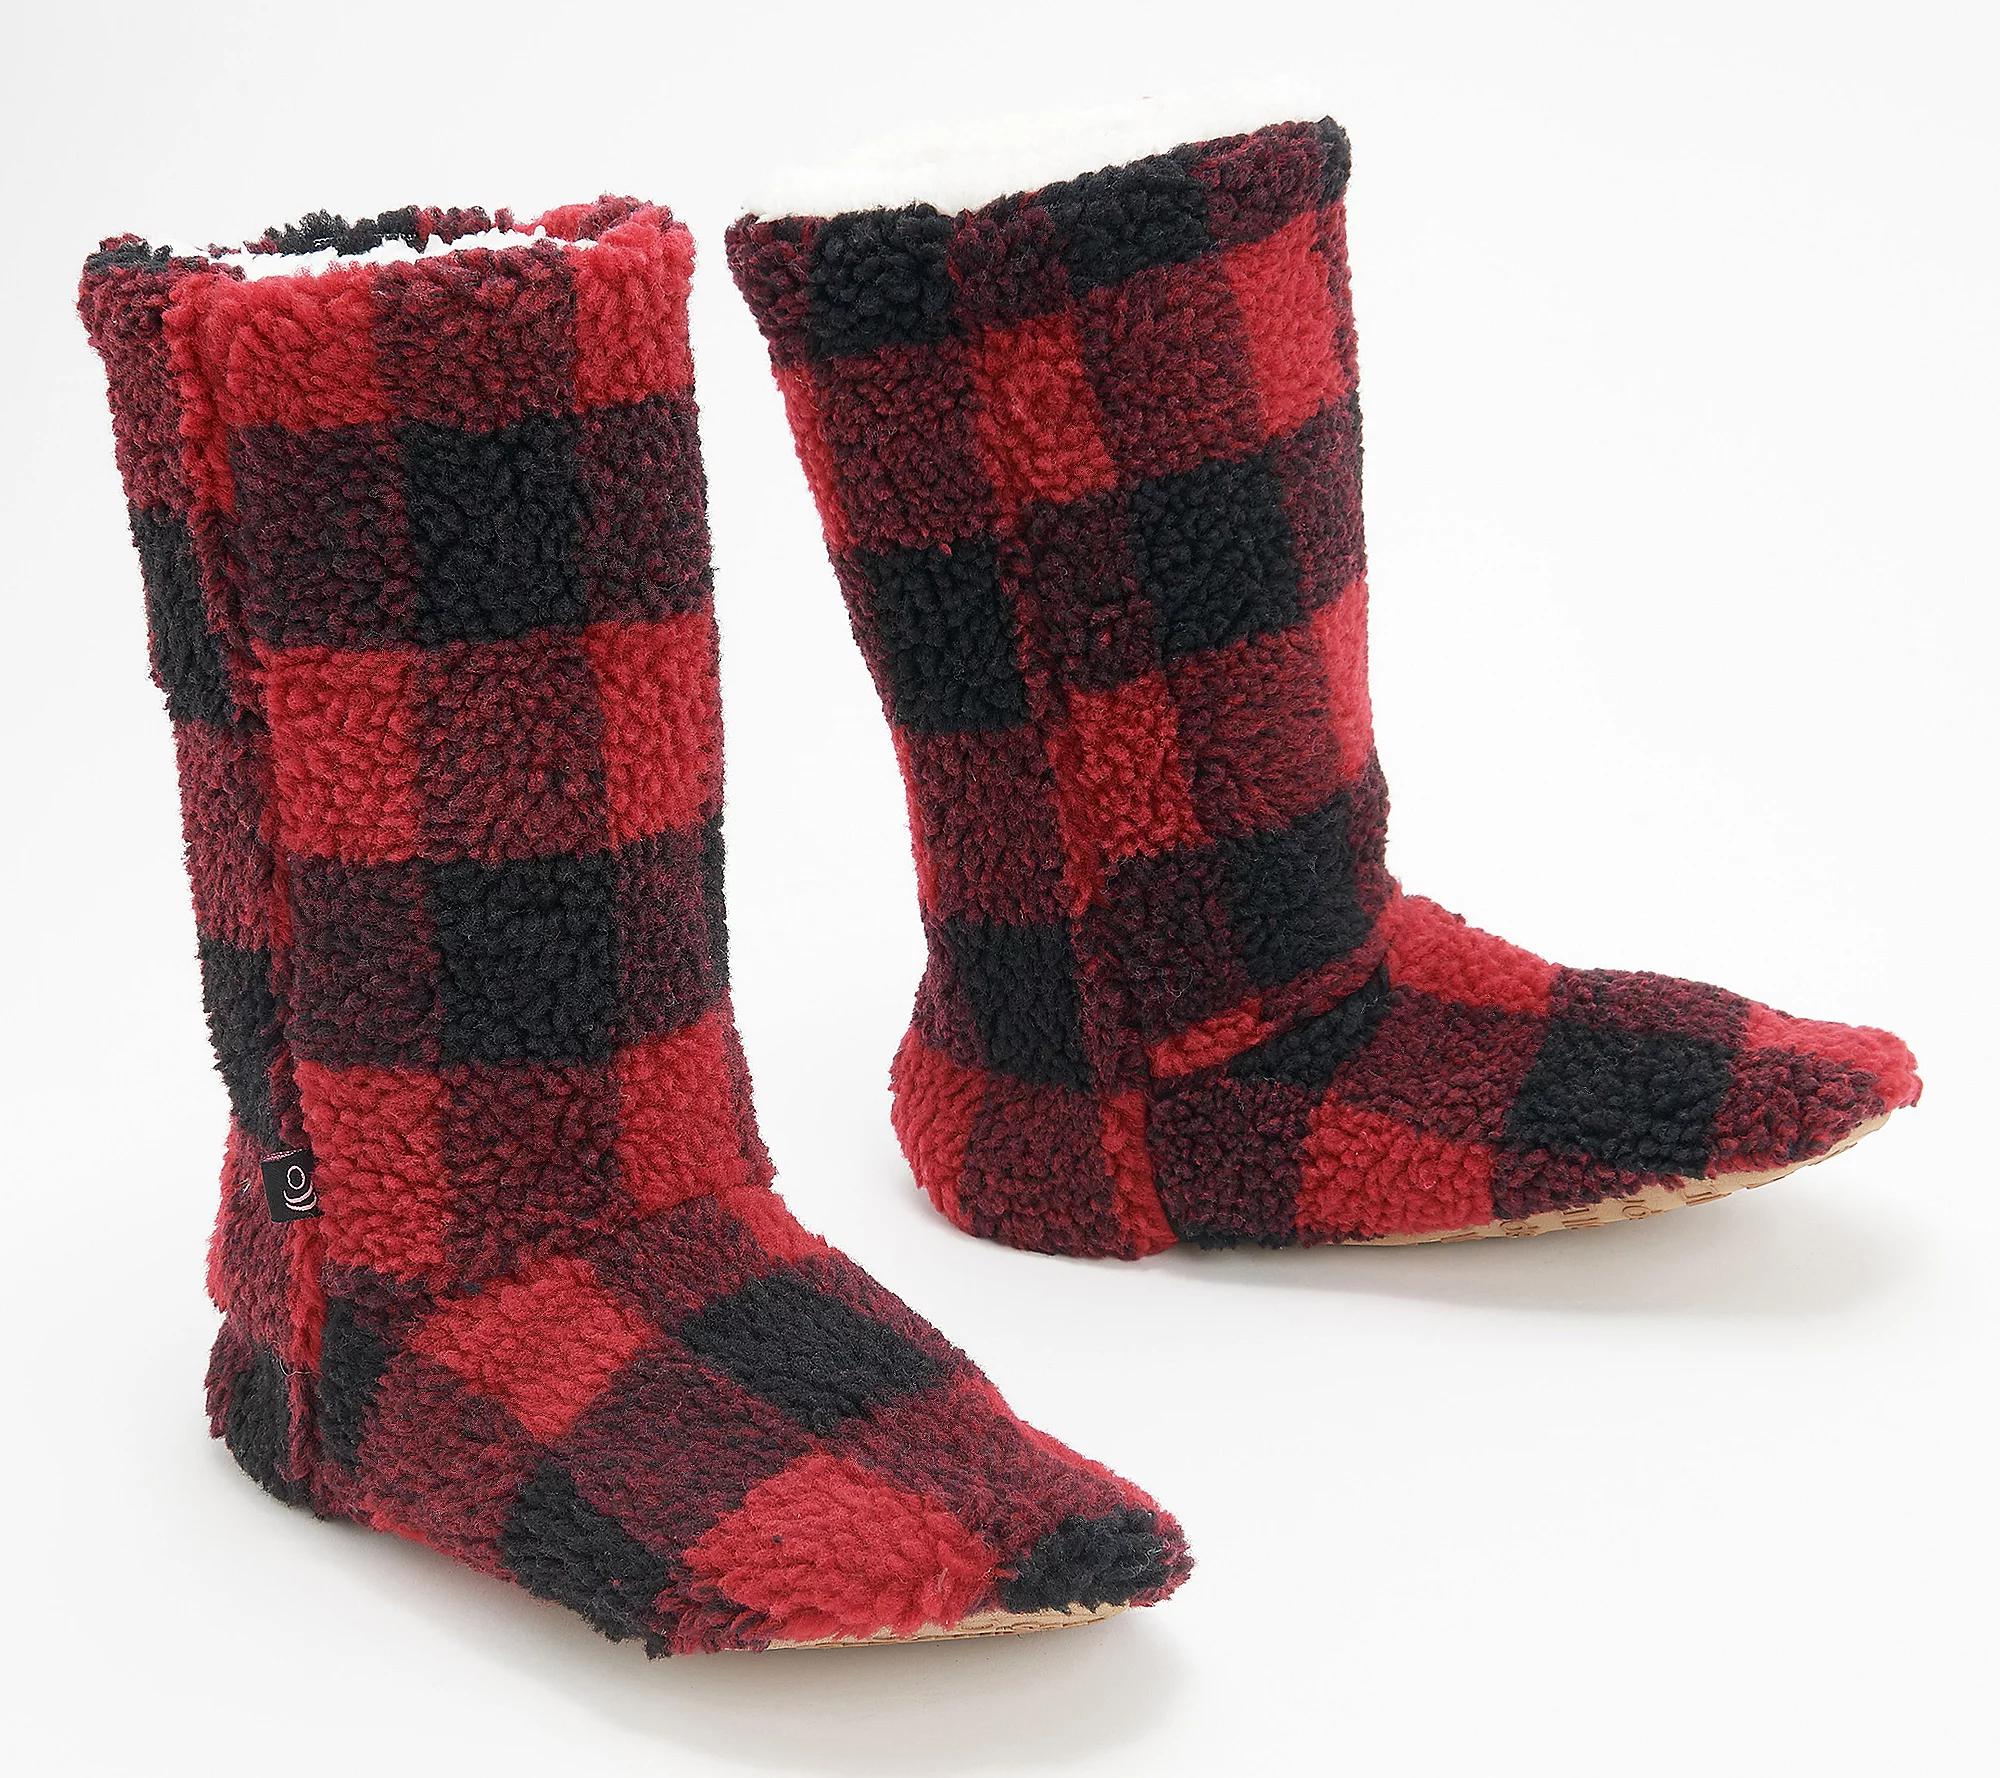 9 Slippers & Socks To Keep Your Feet Warm This Winter – Do Fashion